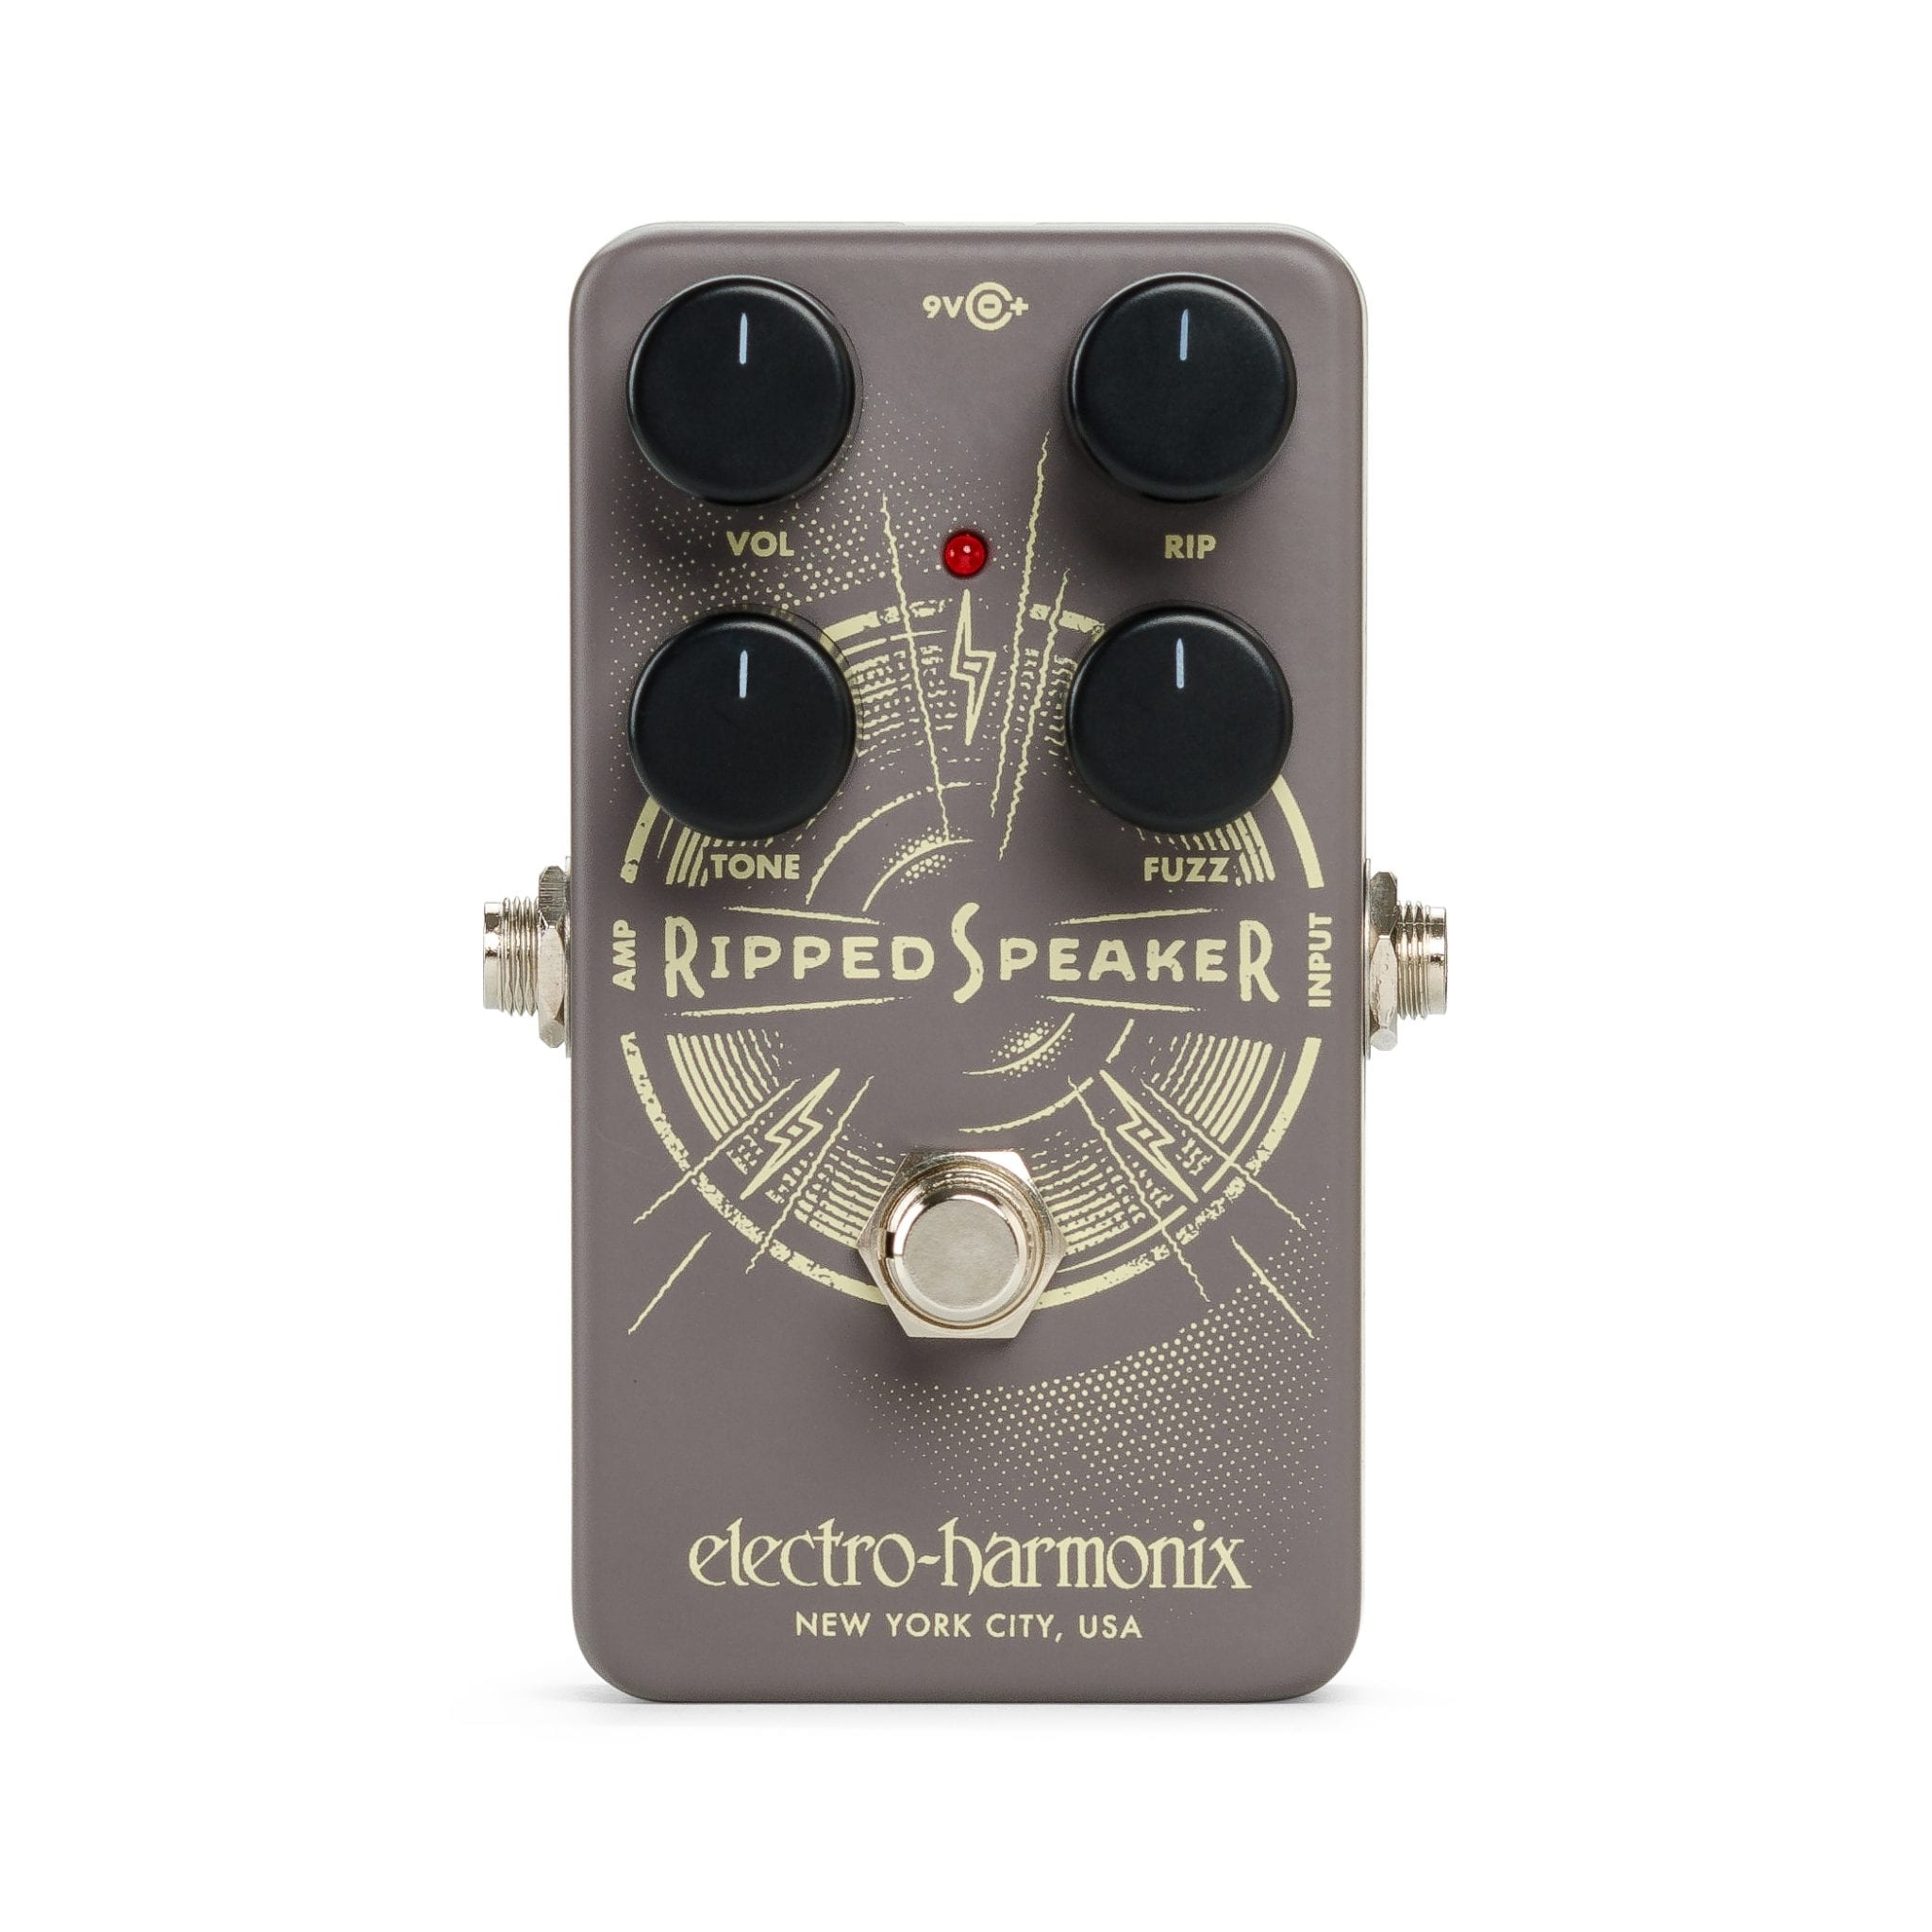 Electro-Harmonix Introduces The Ripped Speaker Fuzz Pedal 